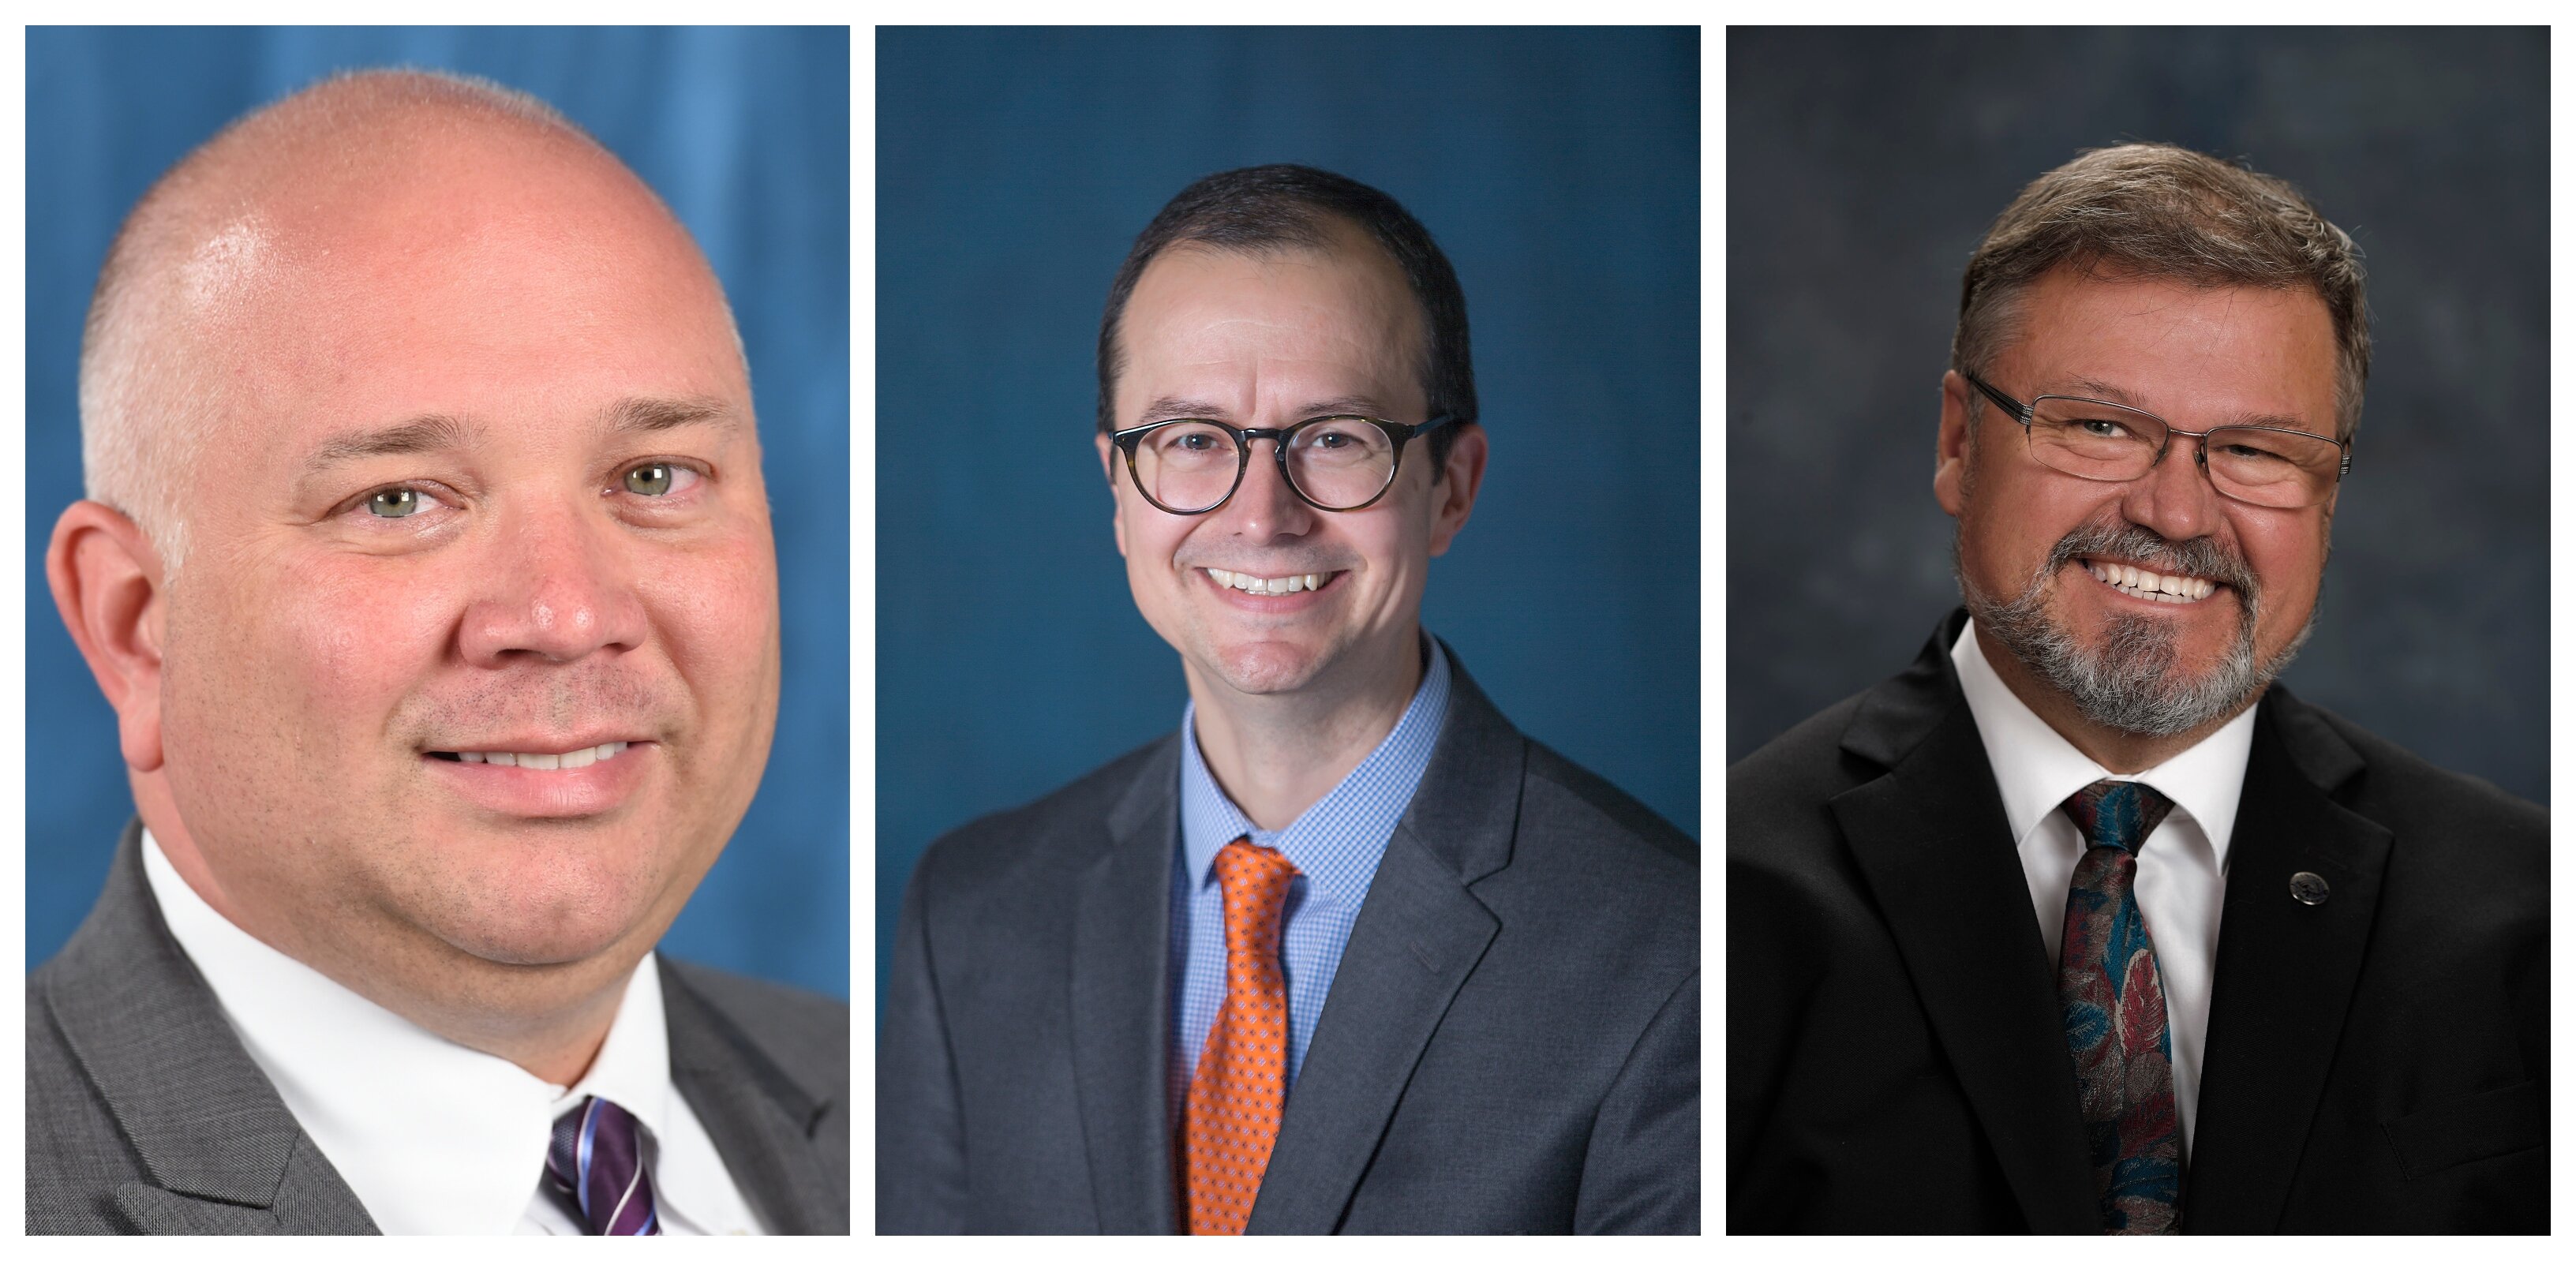 College leaders from Pennsylvania, Wisconsin and Utah have been selected as finalists to become the next president at Grand Rapids Community College.